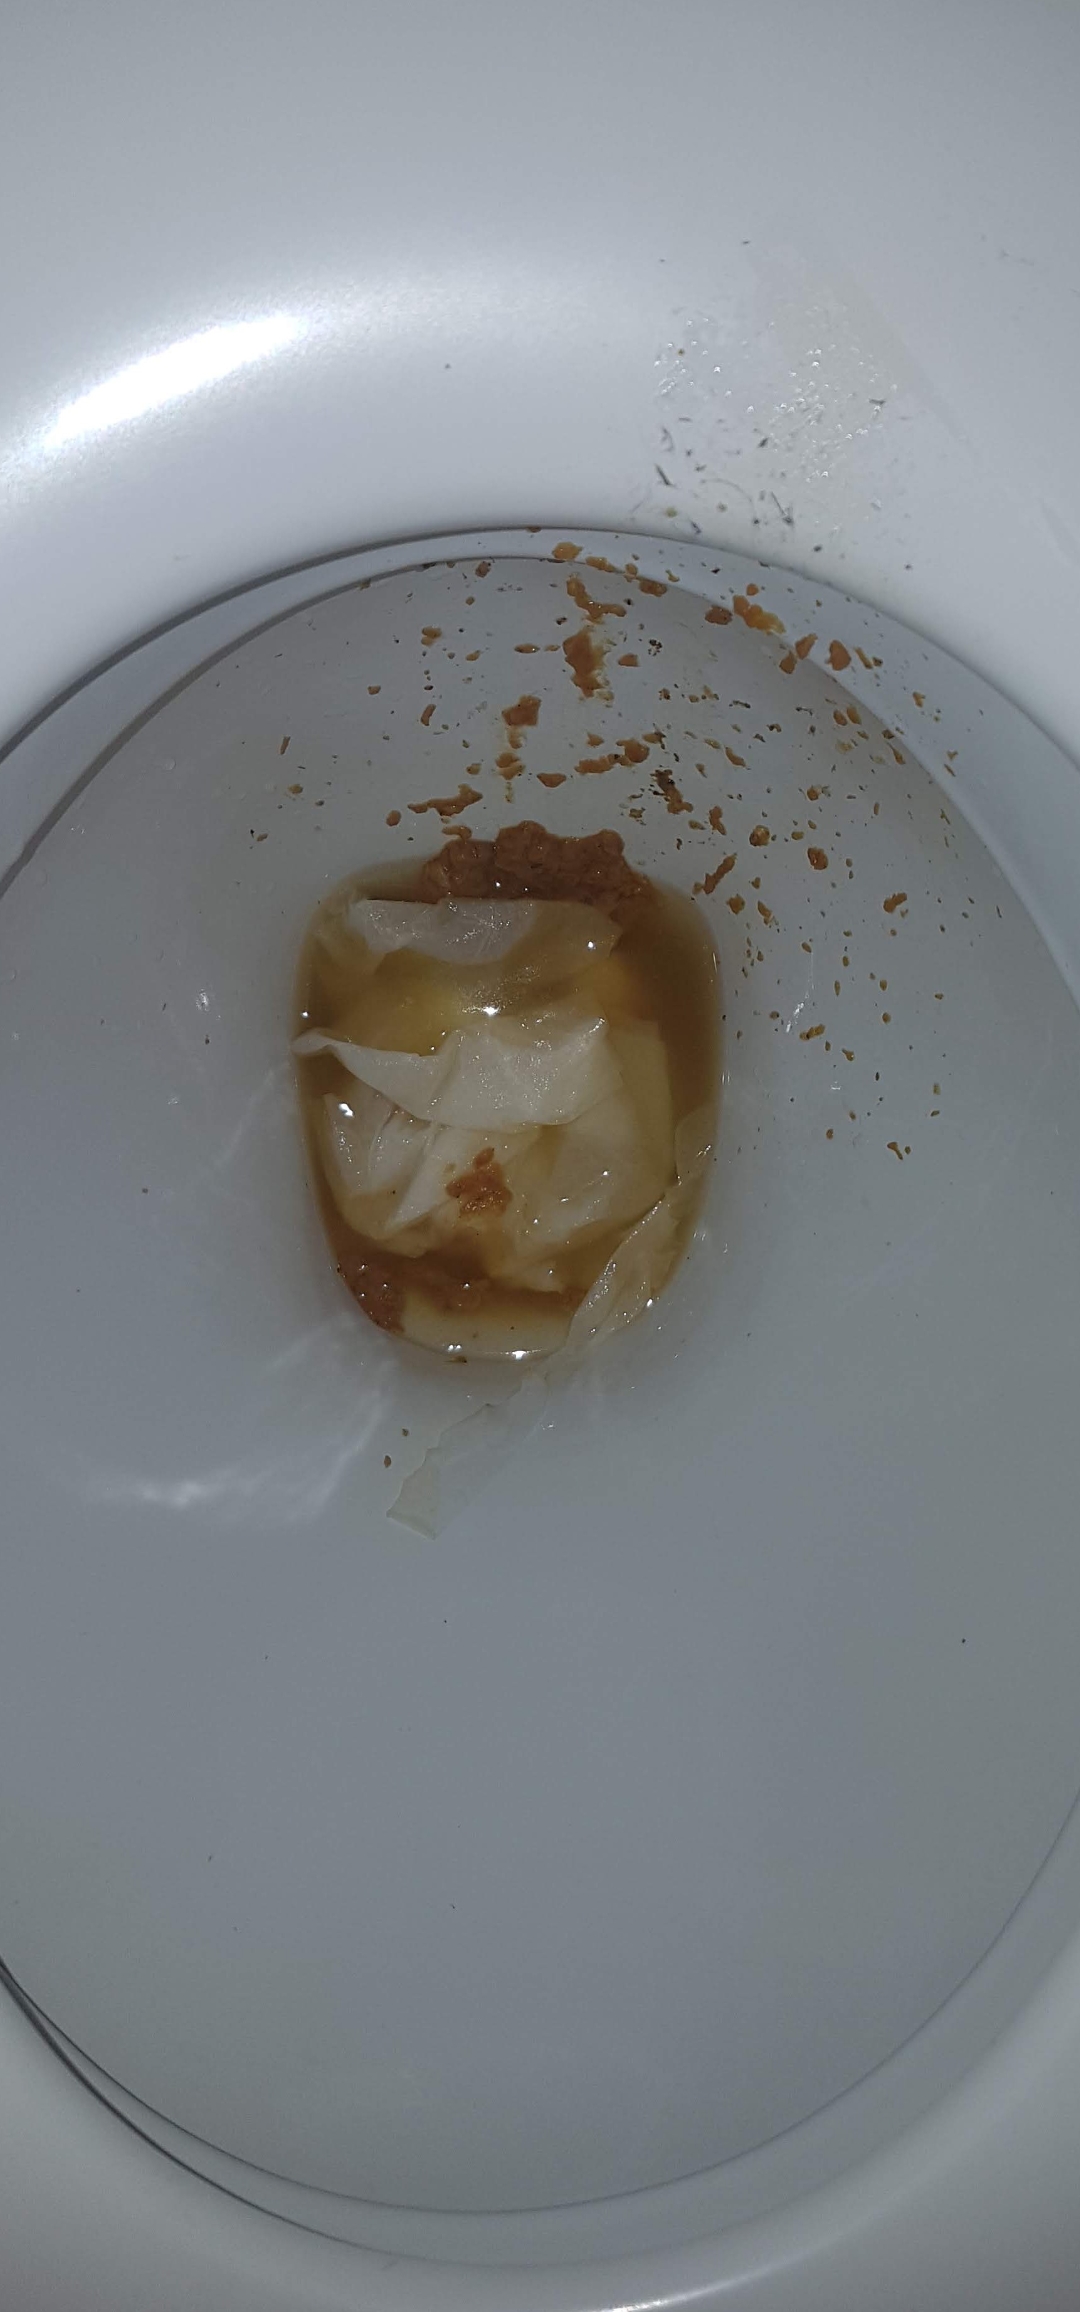 Second bad shit before work on my mates toilet